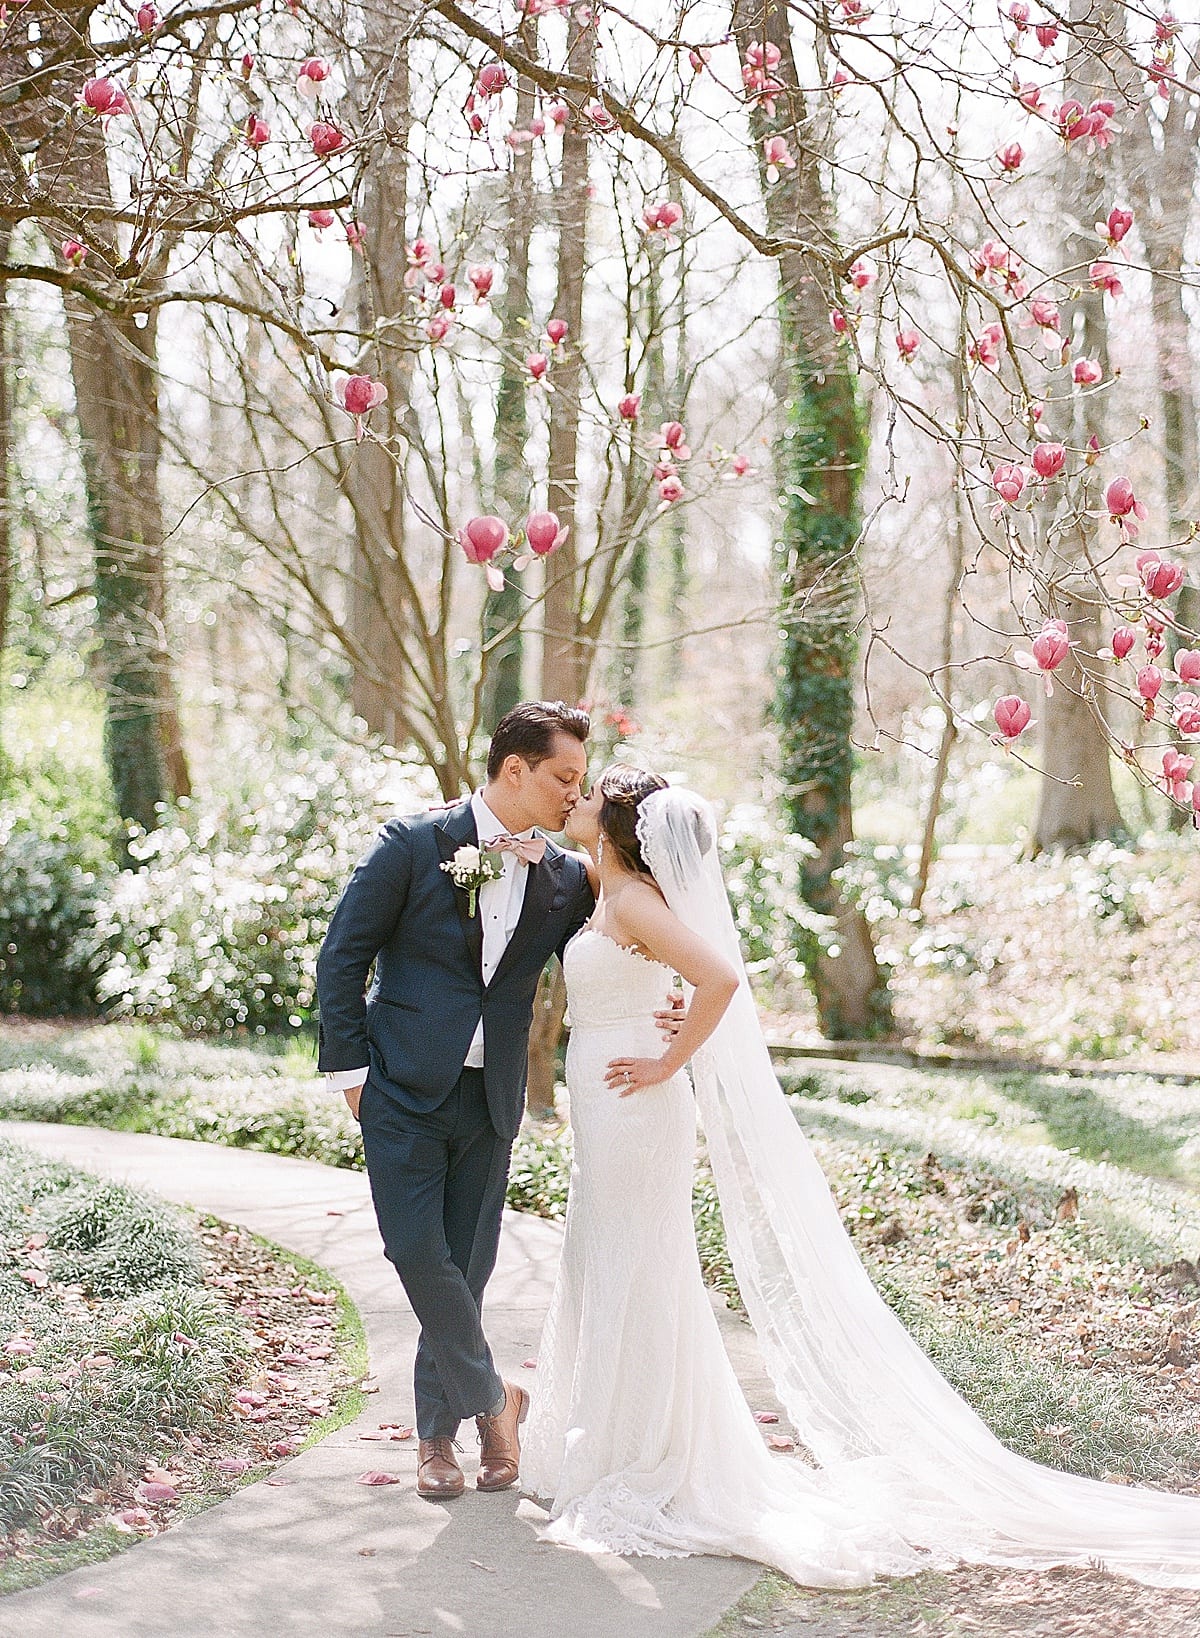 Cator Woolford Gardens Bride and Groom Kissing in Garden Photo